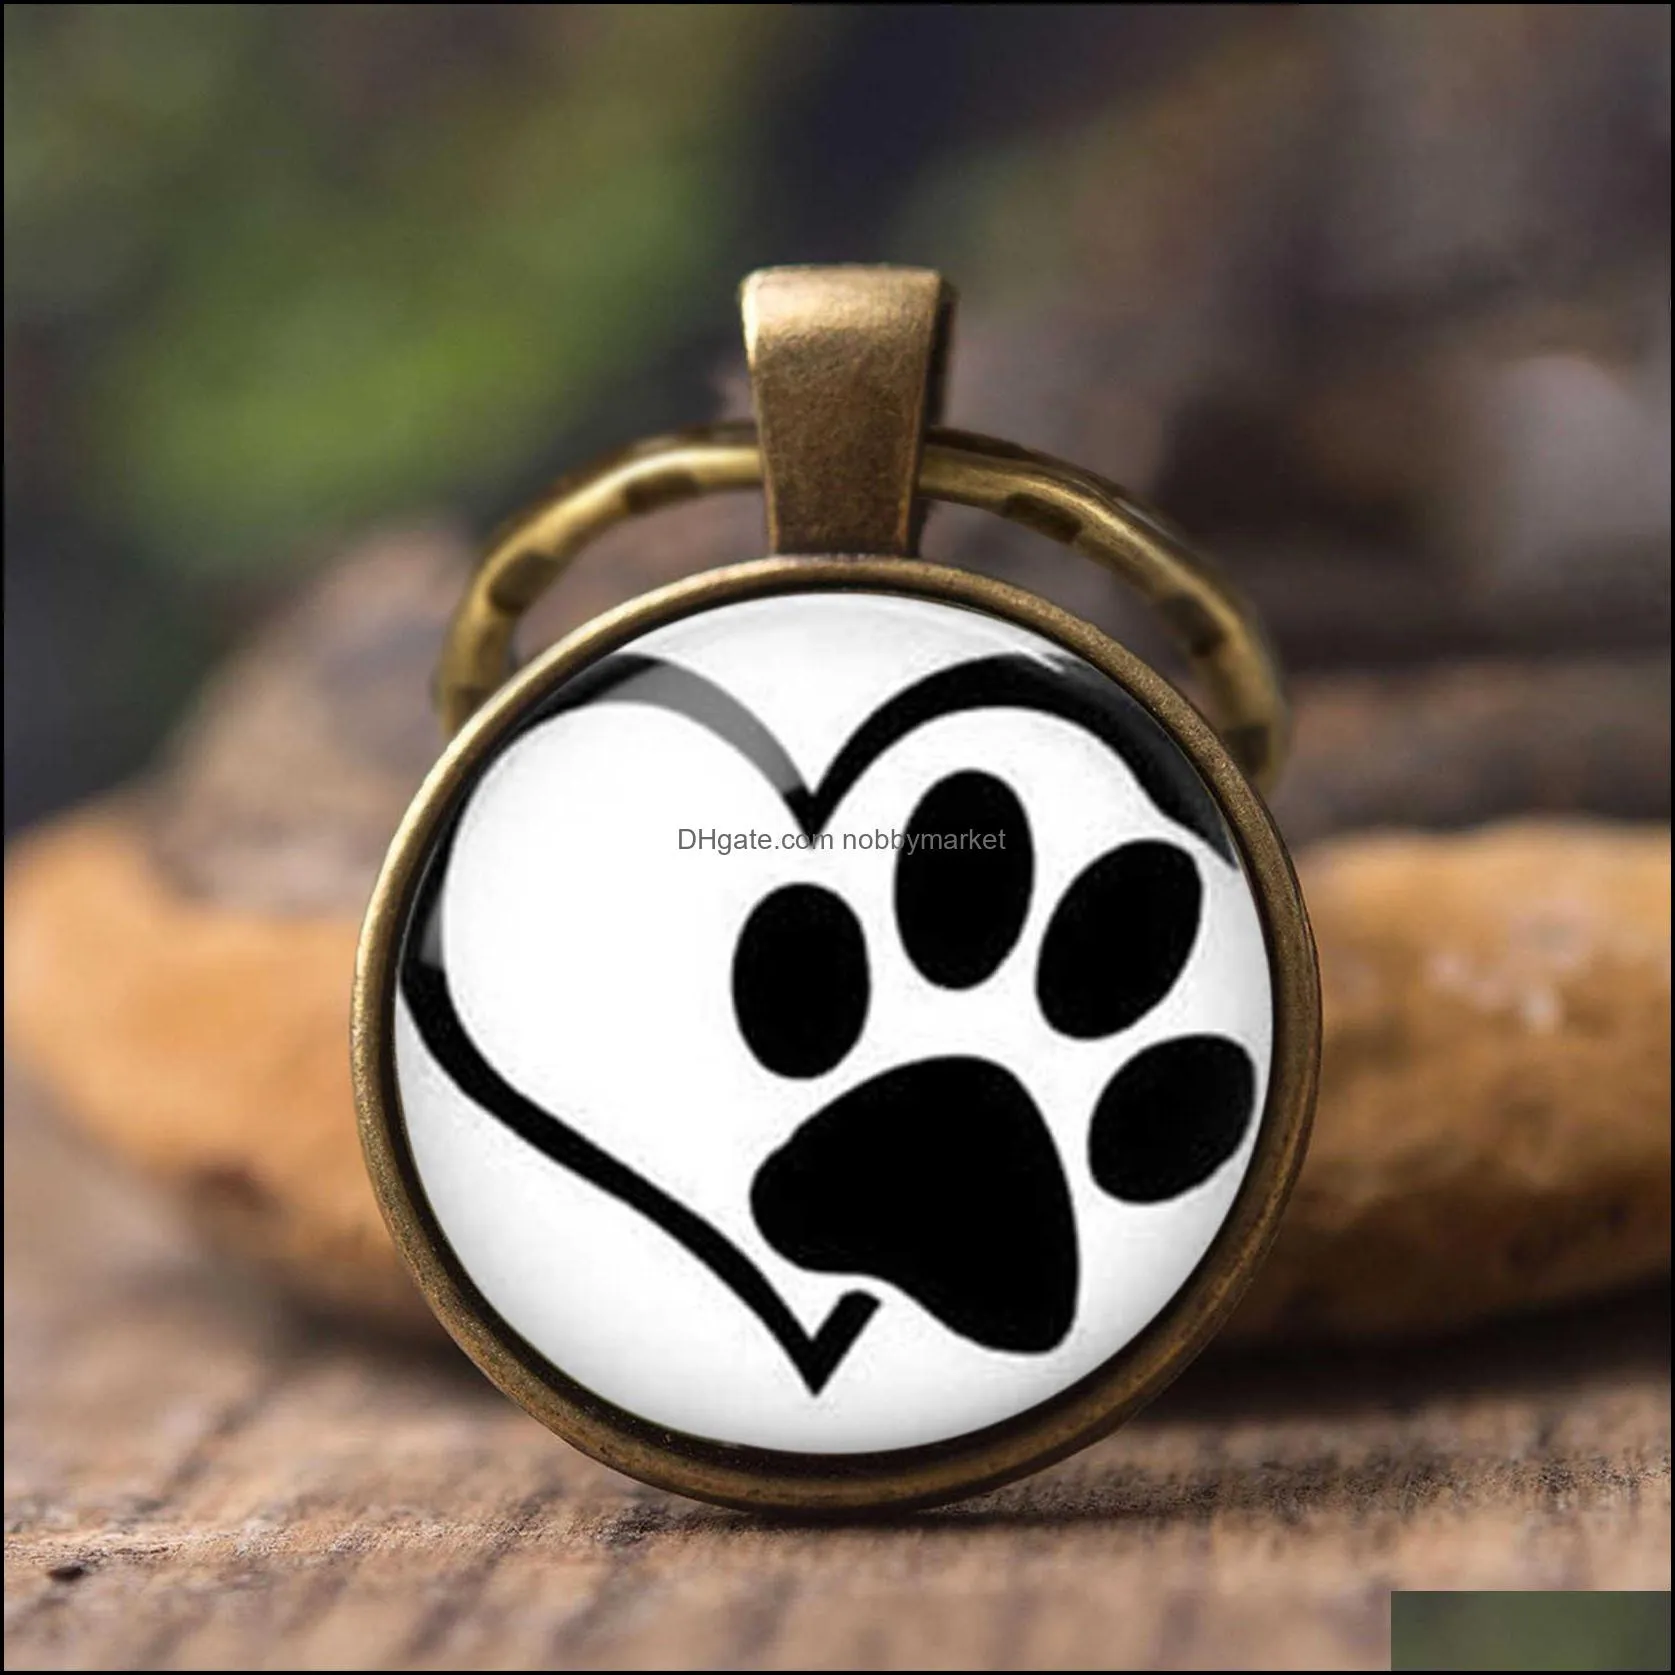 New Cute Animal Printing Key Chains Dog Cat Claw Paw Footprints Glass Cabochon Pendant Car Key Ring Creative Gifts For Men